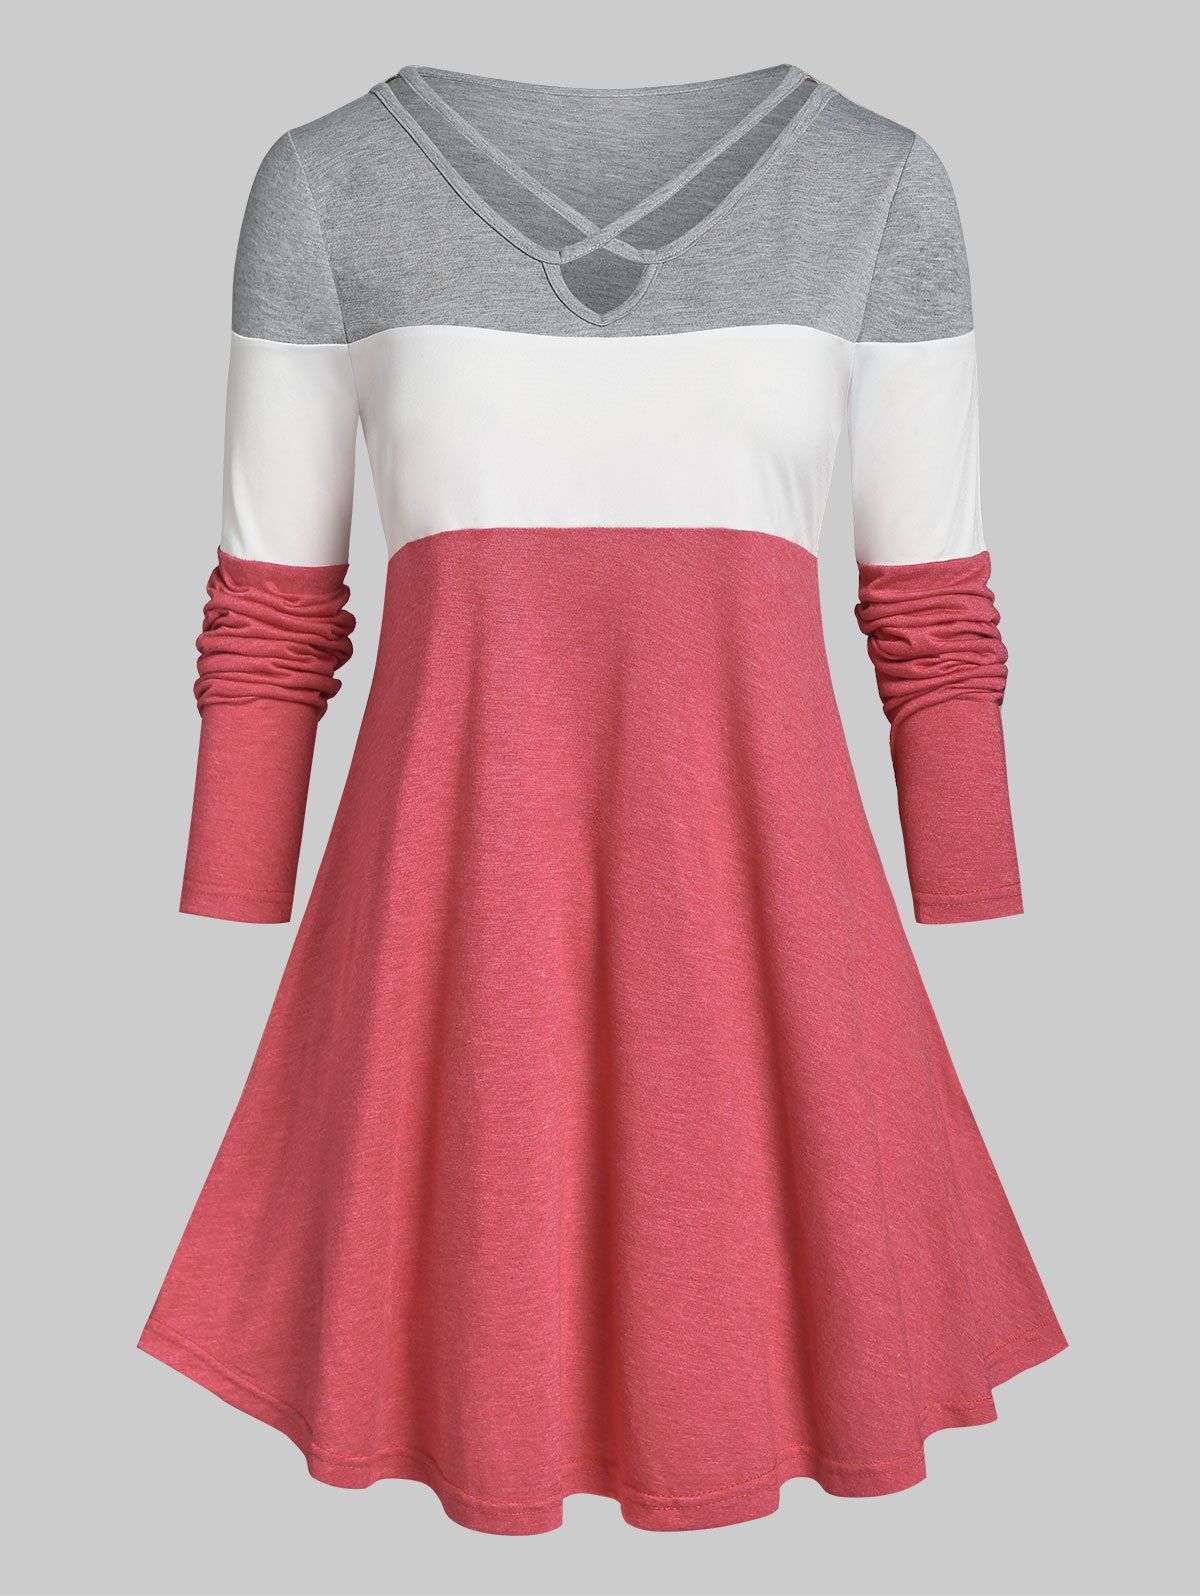 Plus Size Colorblock Criss Cross Long Sleeve Tee - RED 3X